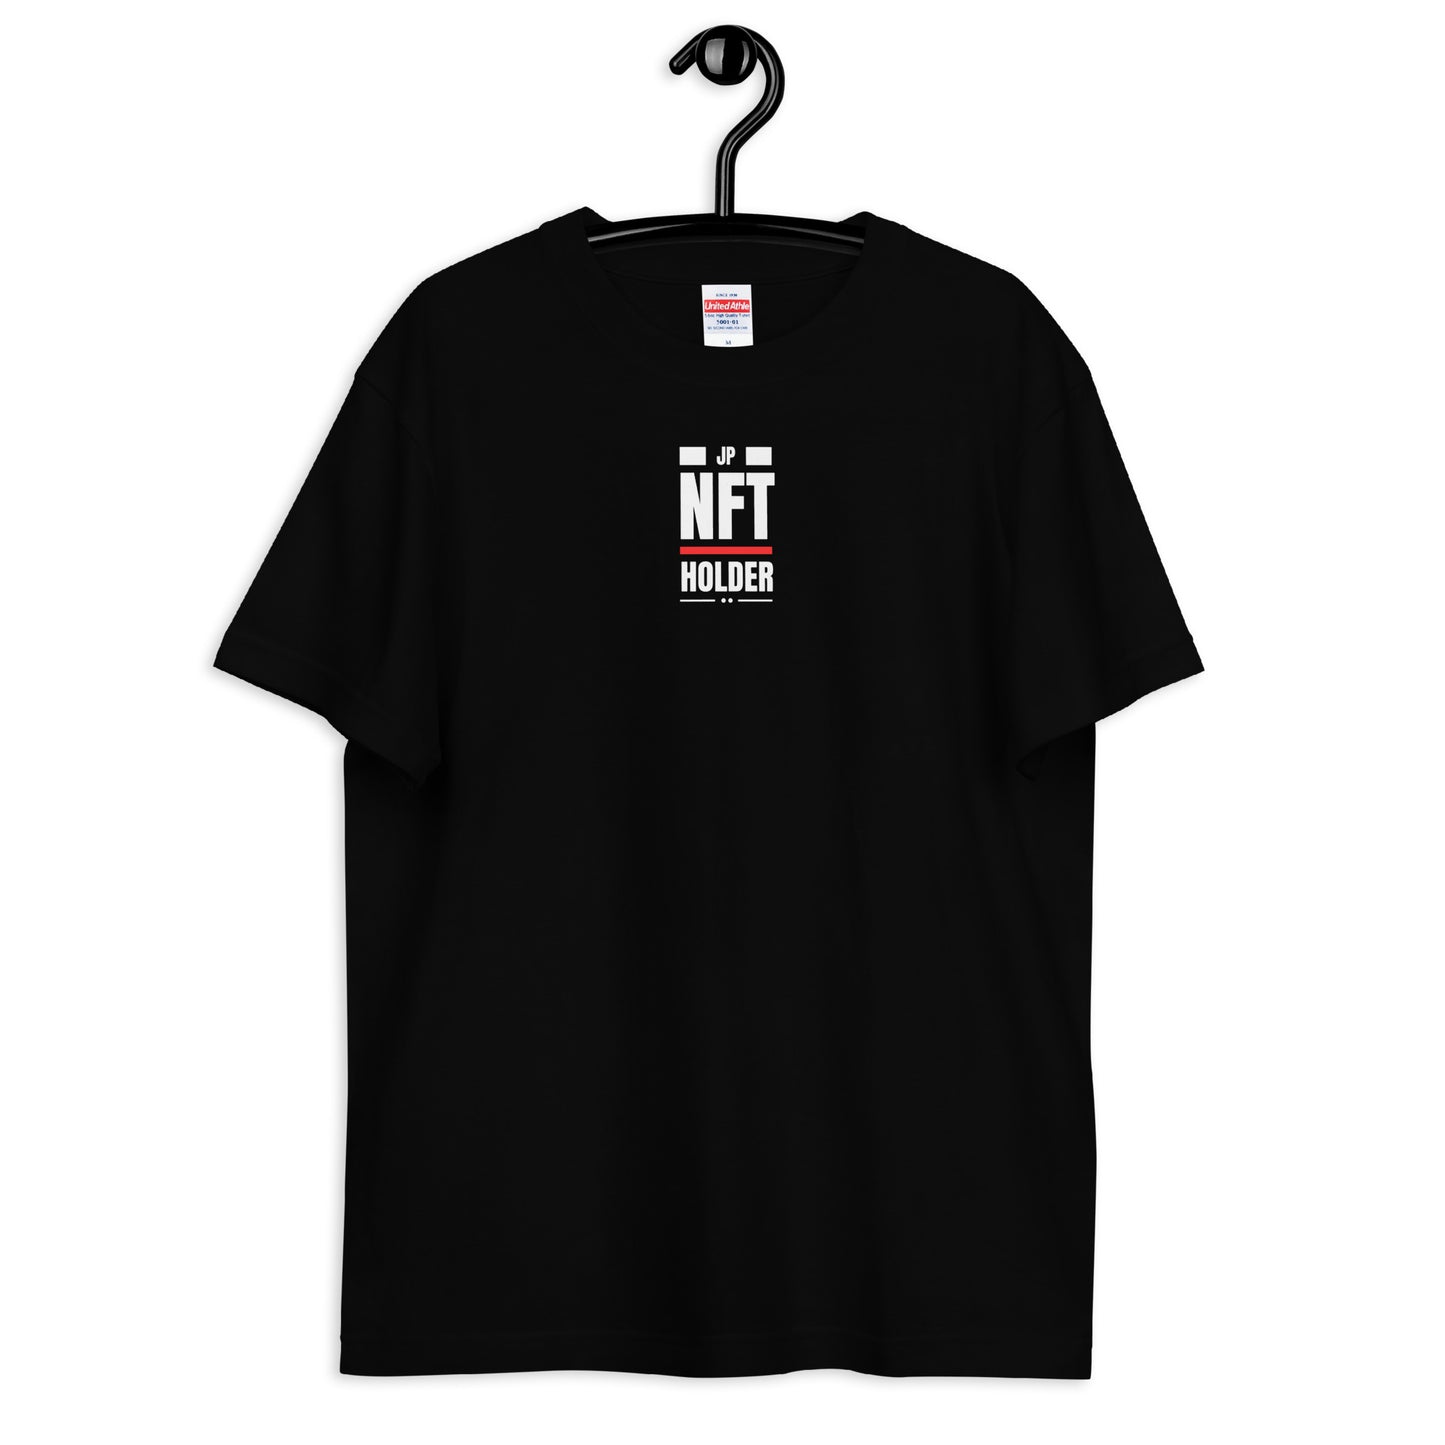 JP NFT COLLAB DESIGN TYPE-F0006 | Unisex high quality tee | 6colors